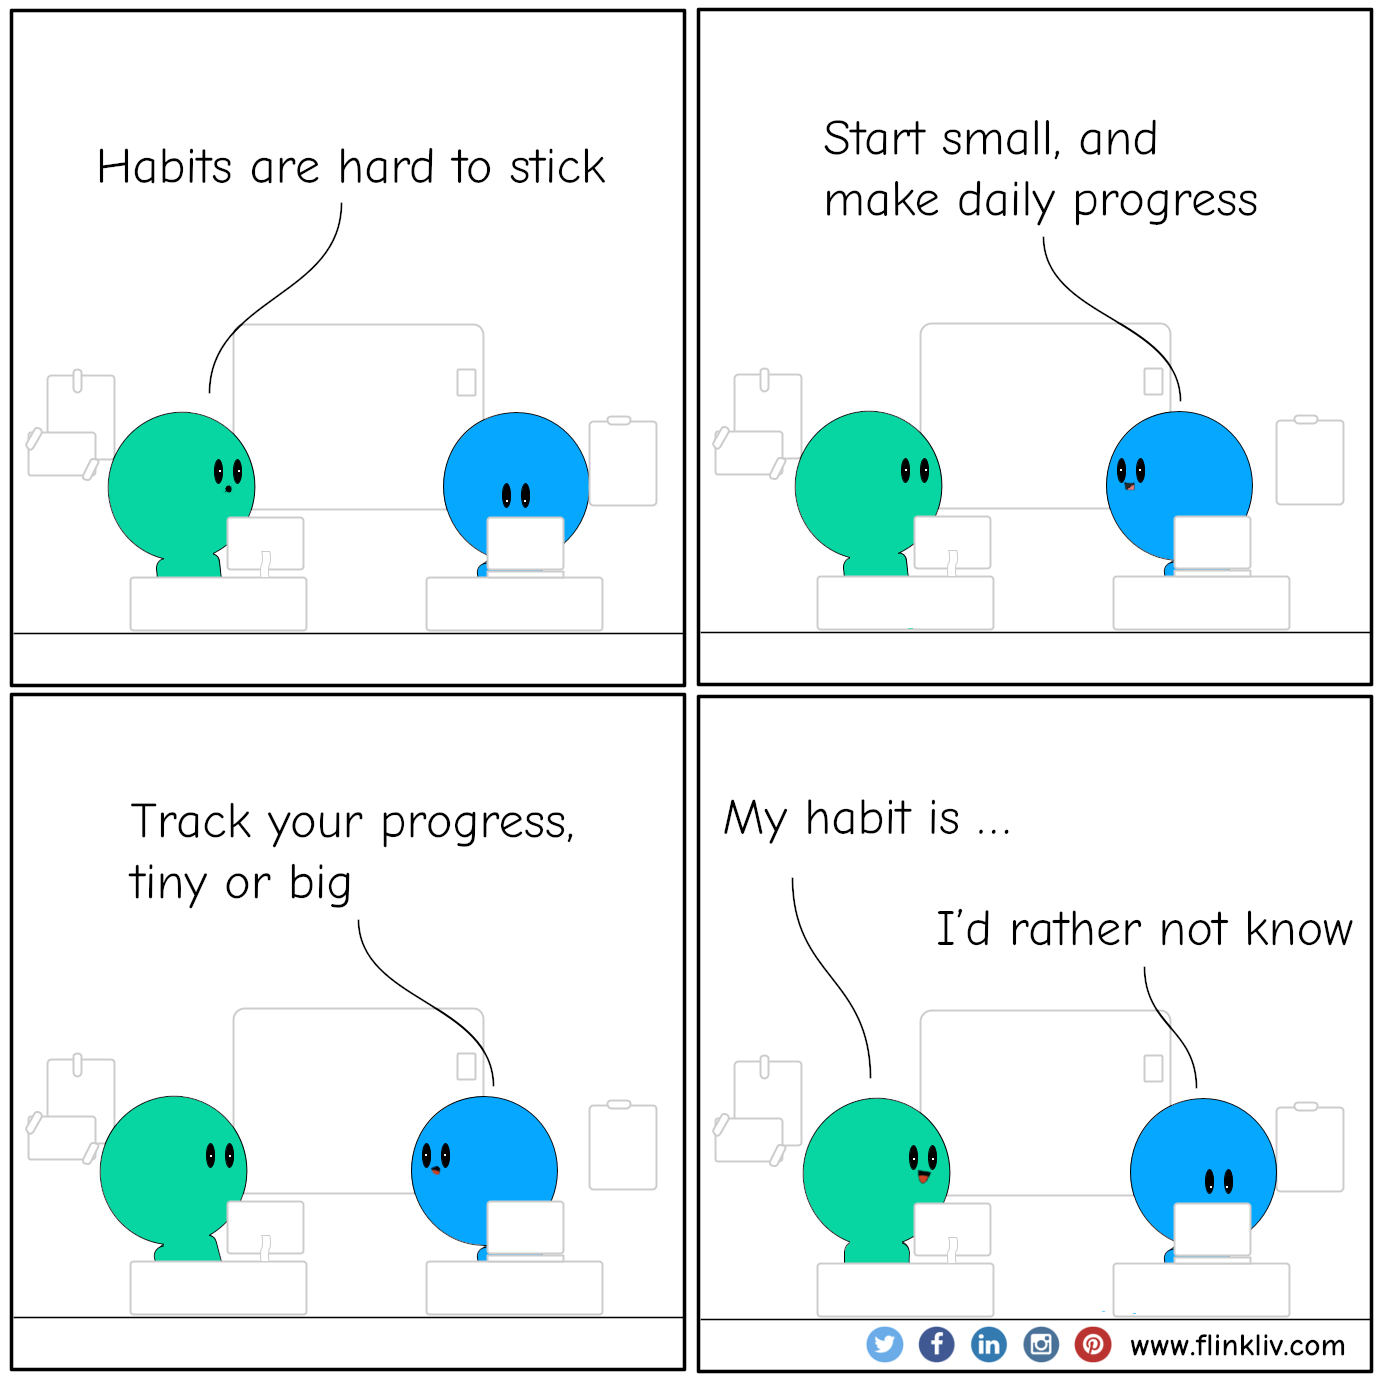 A conversation between A and B about how to make habits stick A: Habits are hard to stick. B: Start small, and make daily progress. B: Track your progress, tiny or big. A: My habit is ... B: I’d rather not know. By flinkliv.com